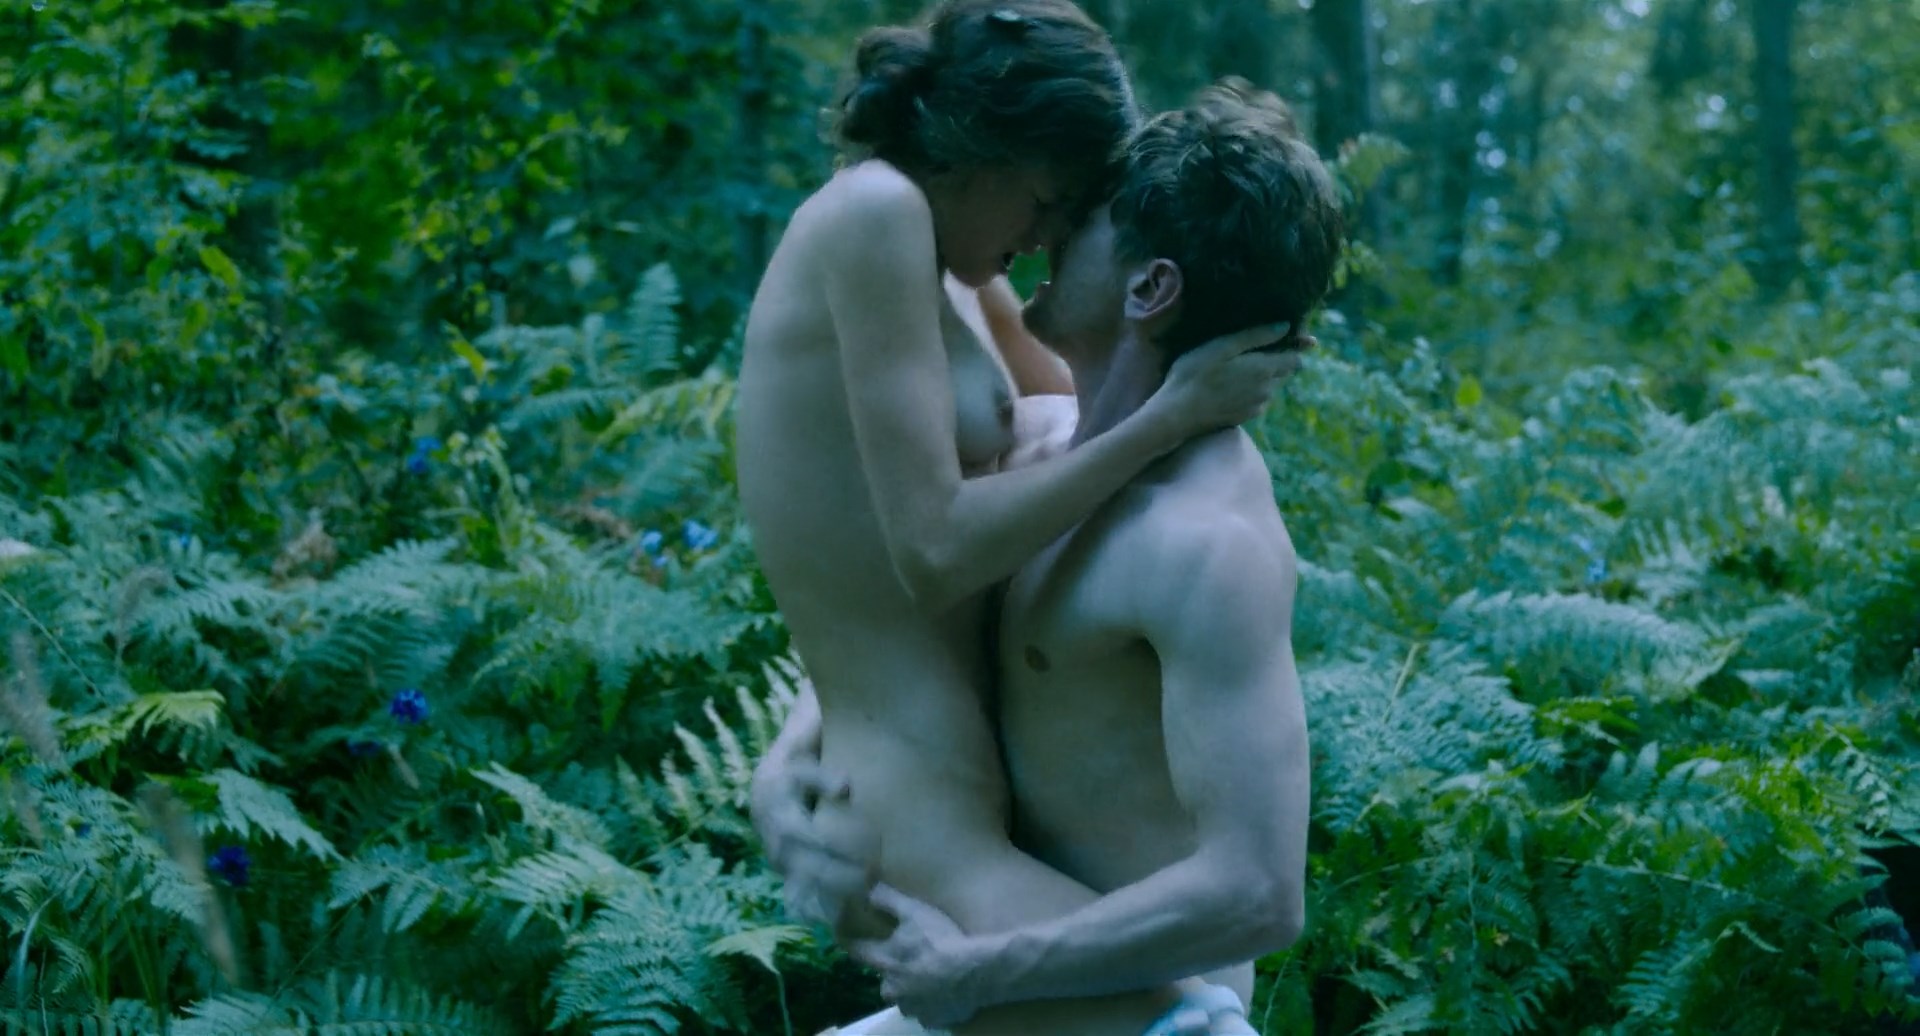 Lady chatterley's lover nude scenes